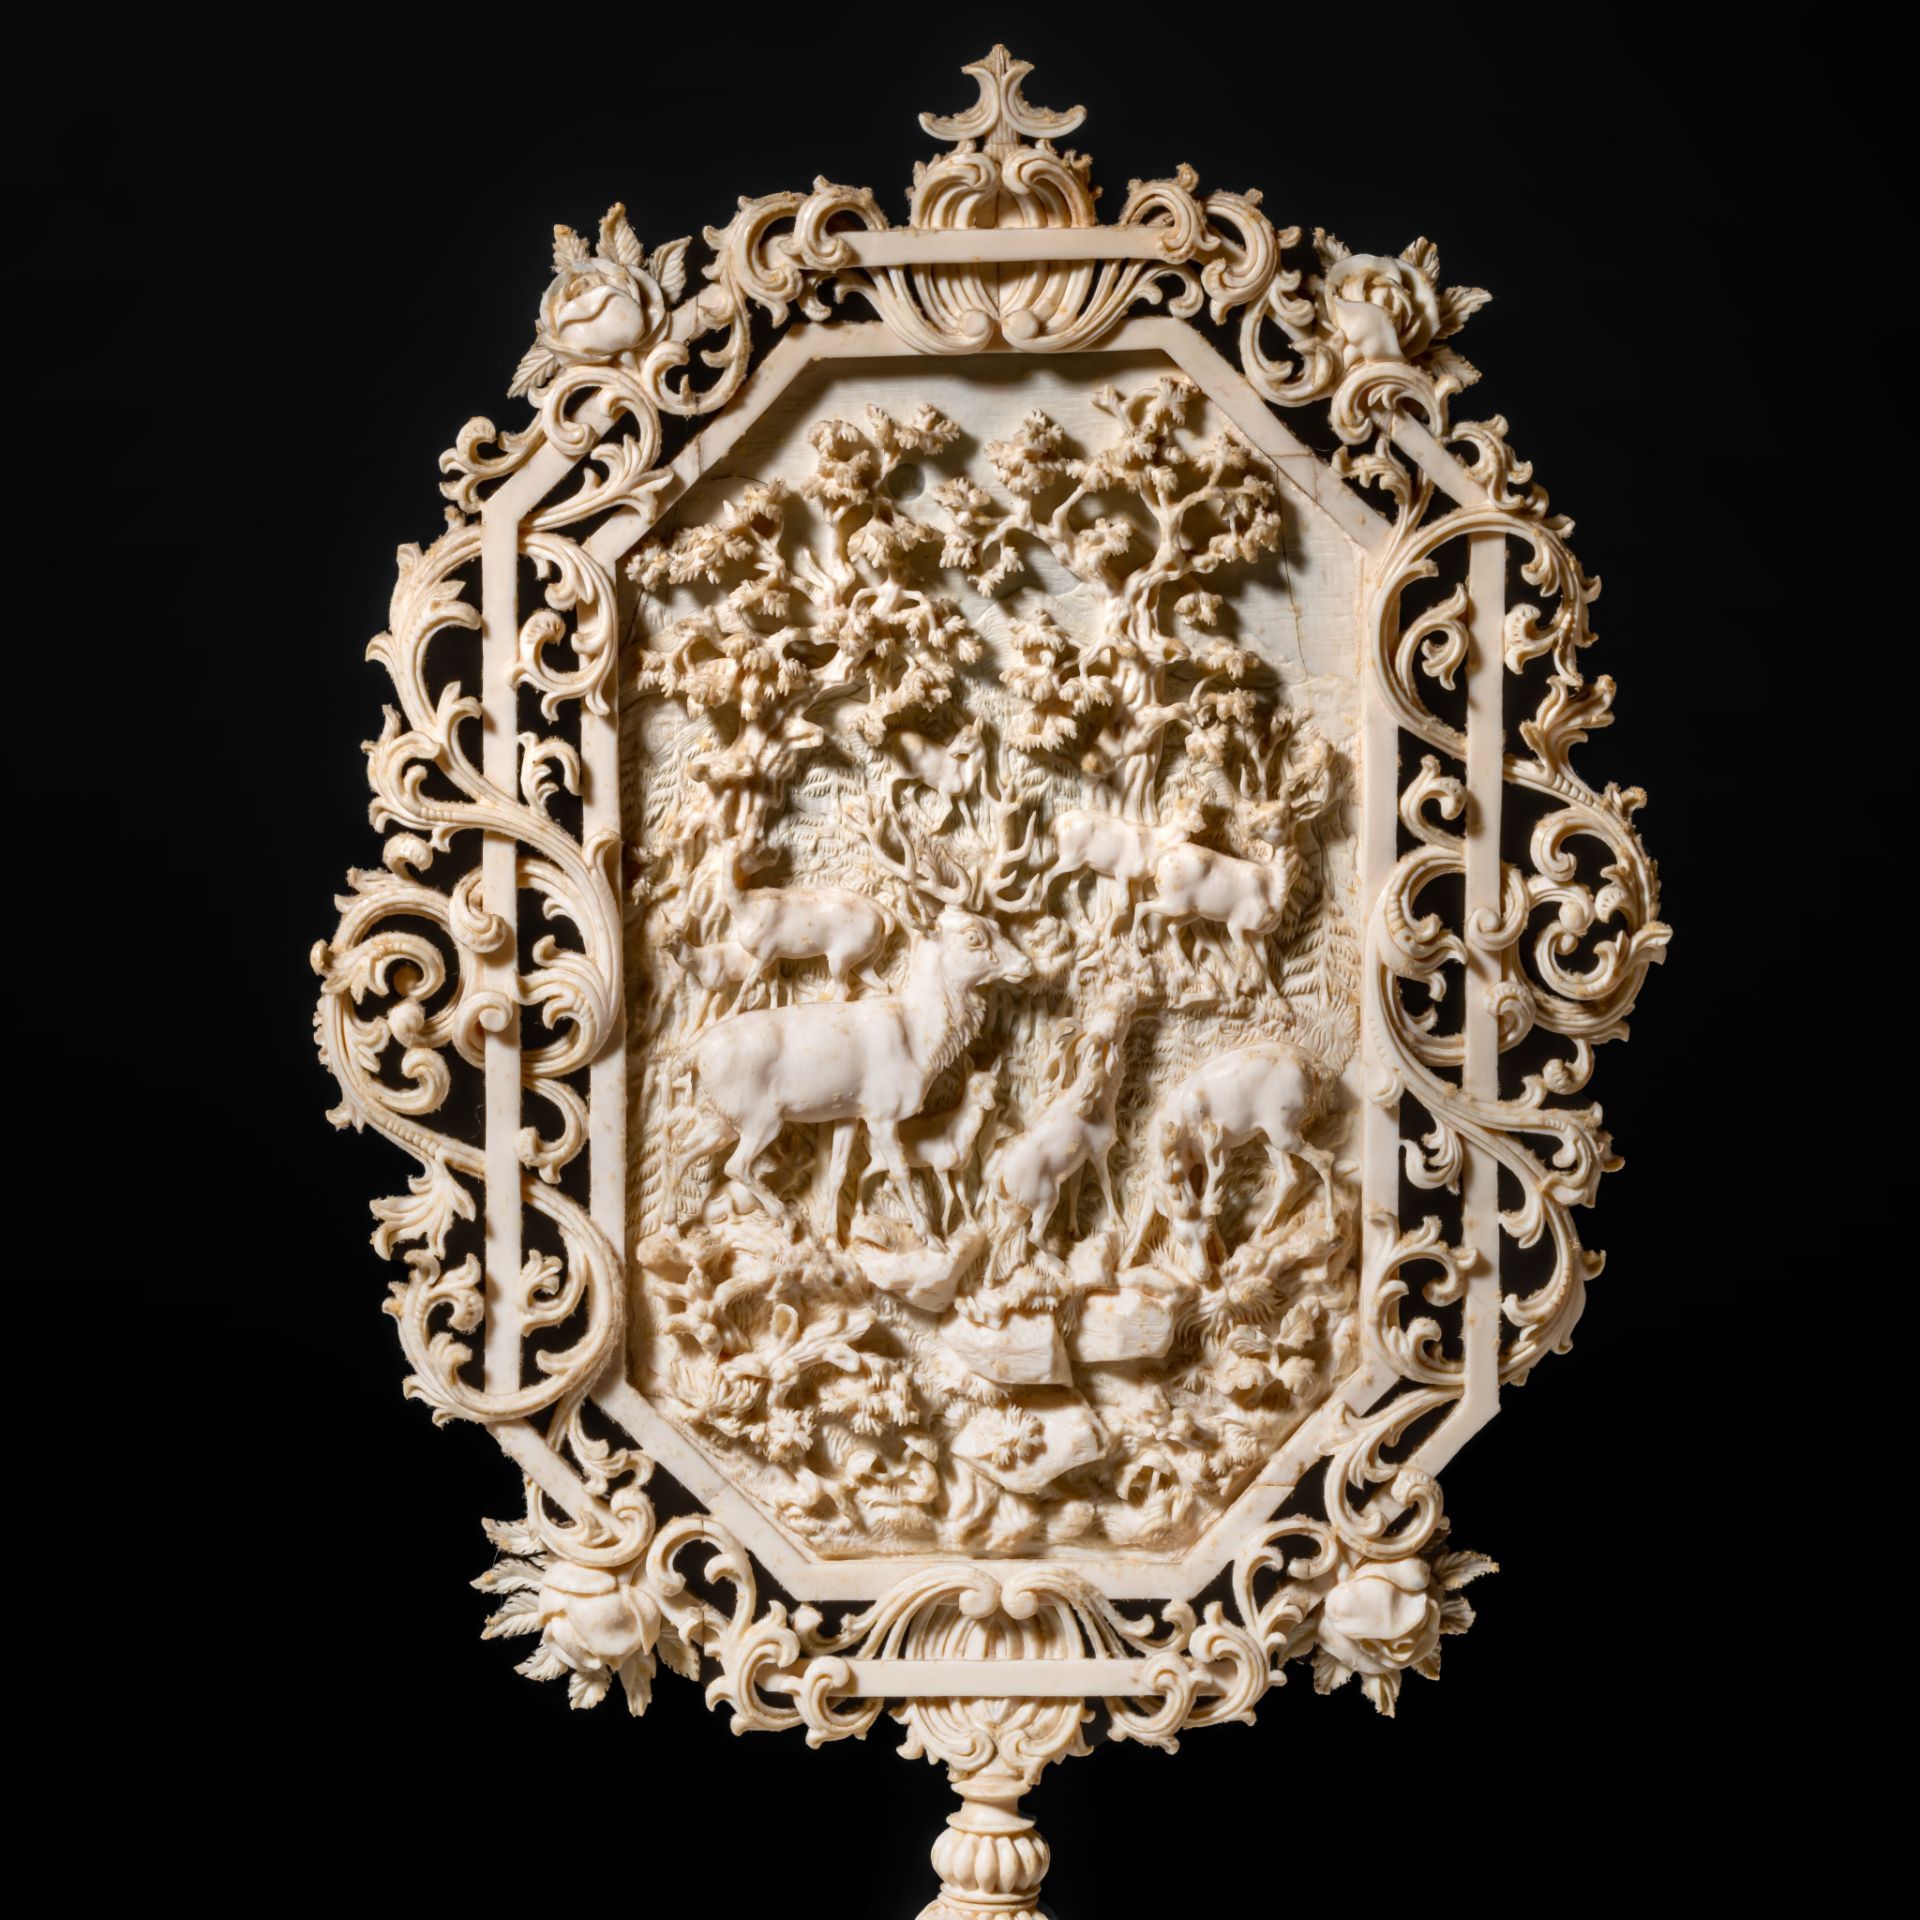 A 19thC, probably German, richly carved ivory candle screen, H 43,5 cm - 491 g (+) - Image 6 of 6